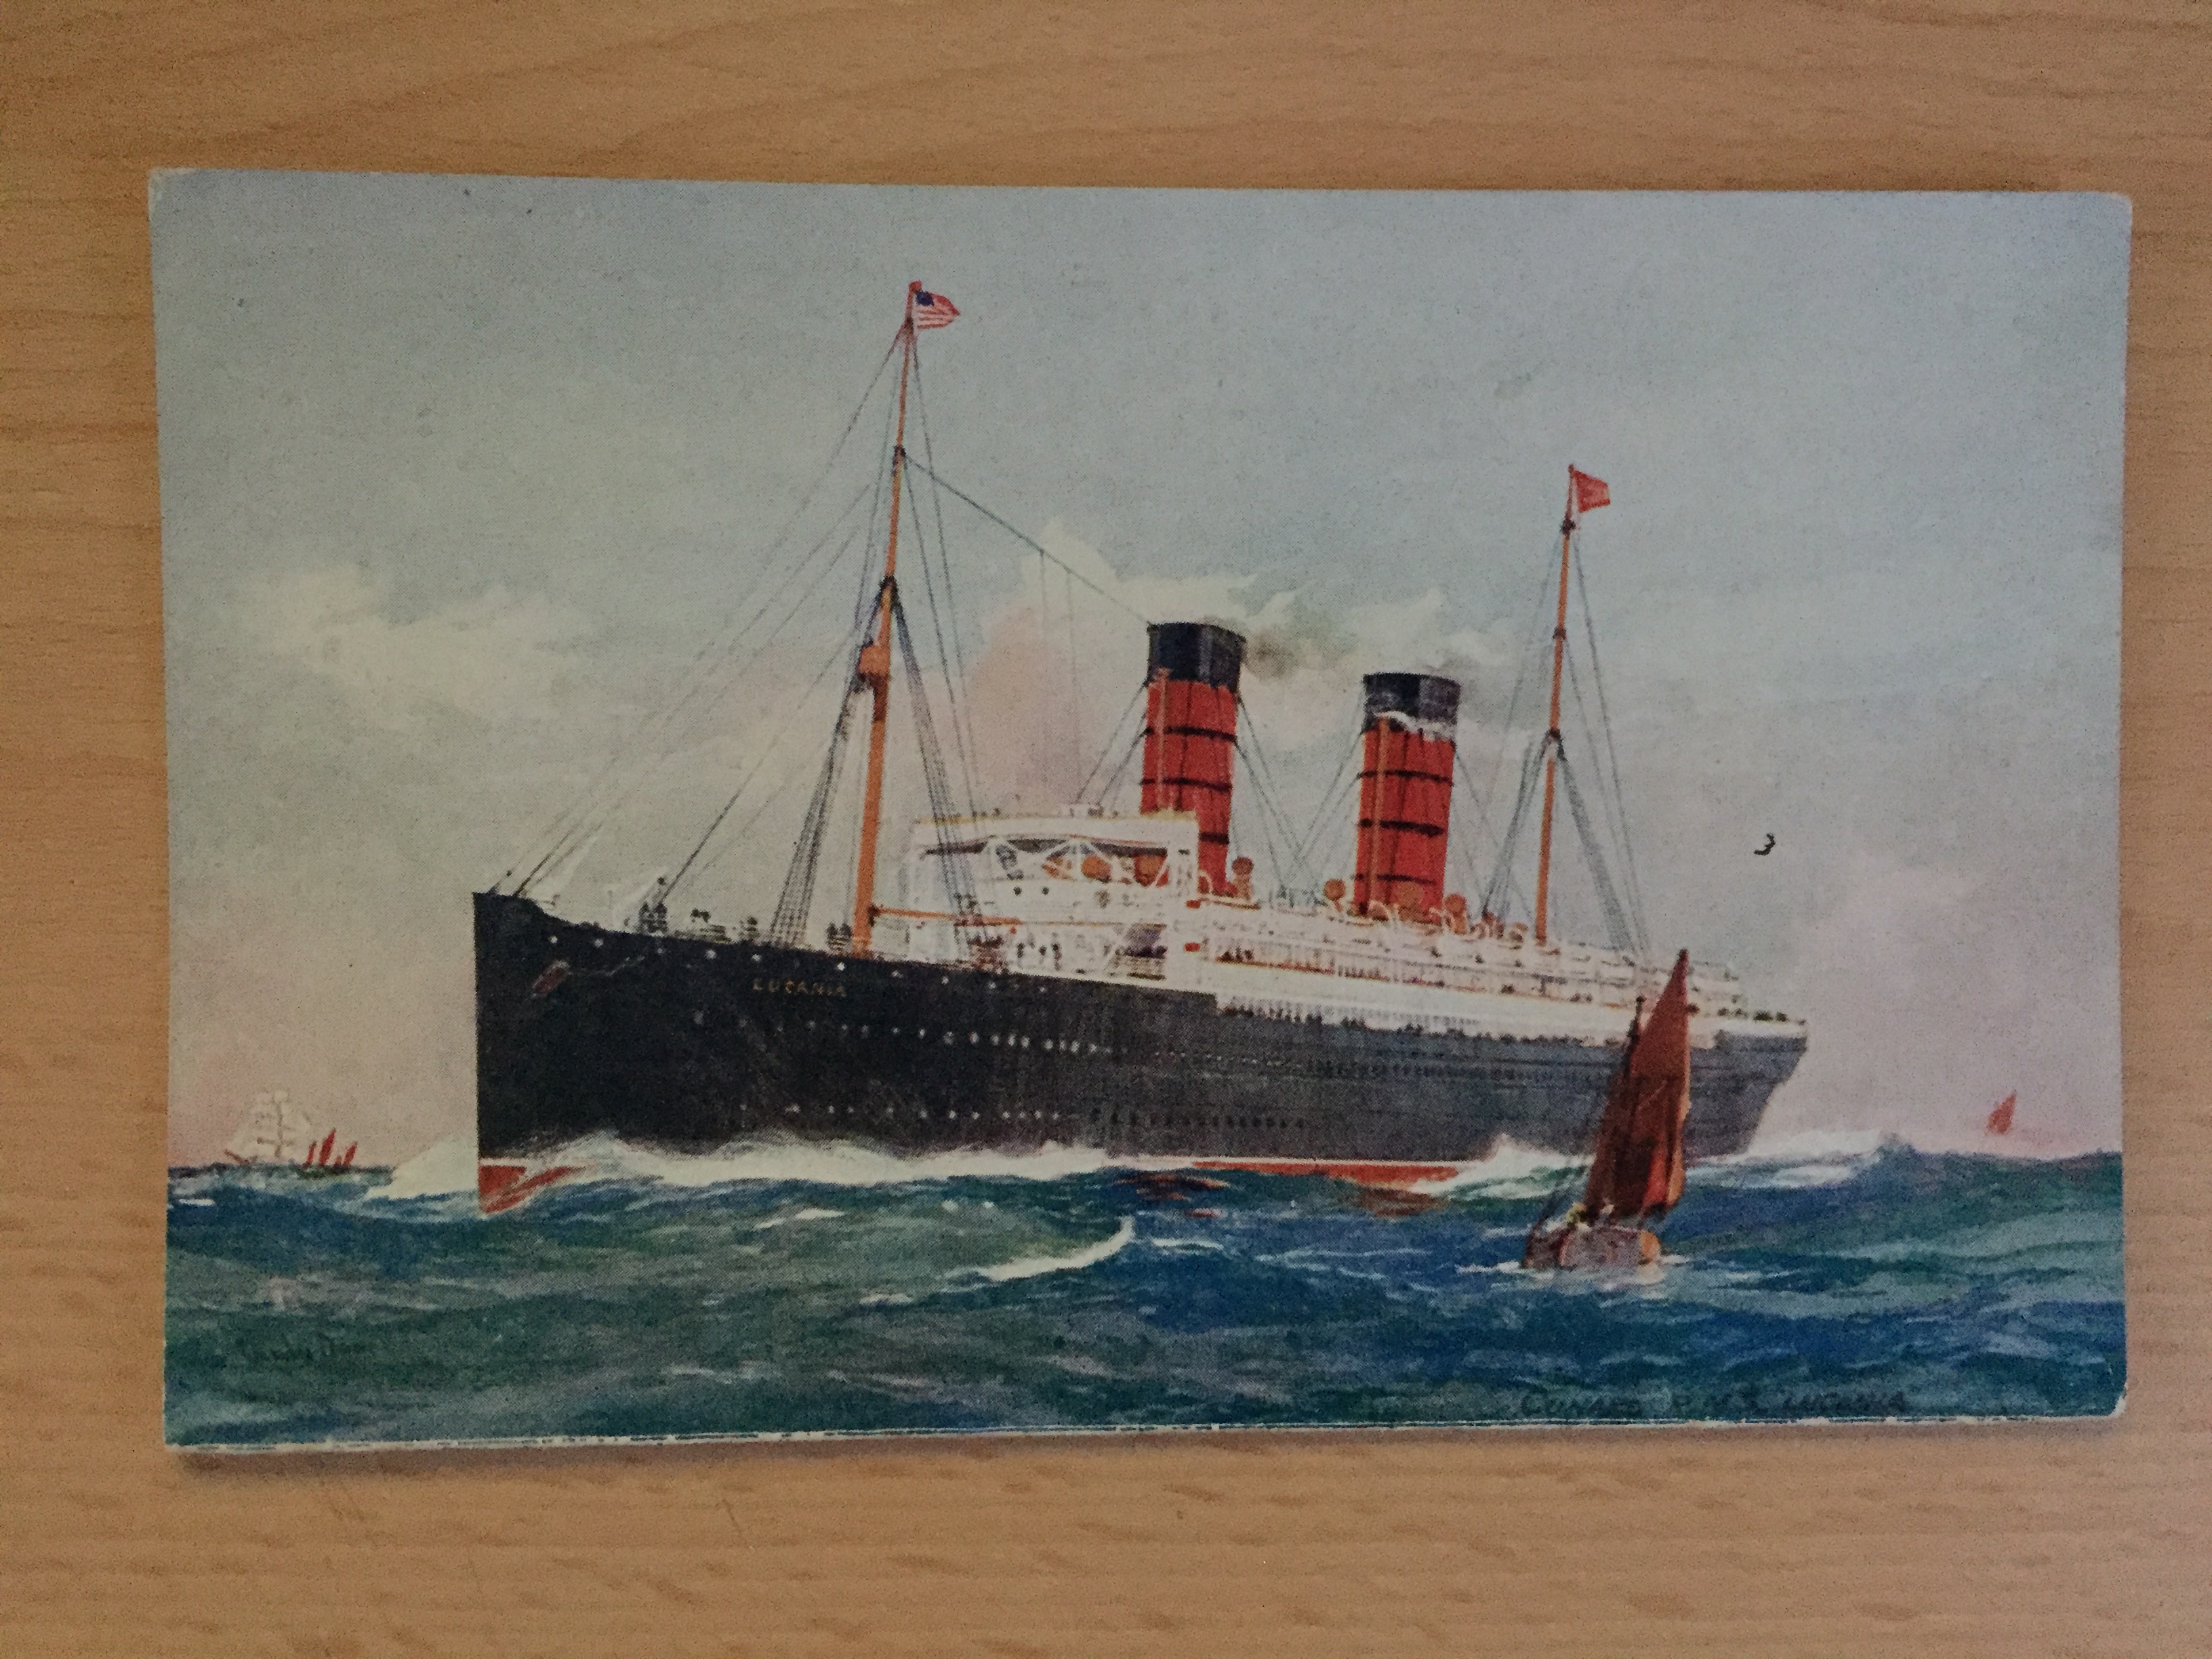 EARLY UNUSED COLOUR POSTCARD FROM THE CUNARD LINE VESSEL THE SCYTHIA